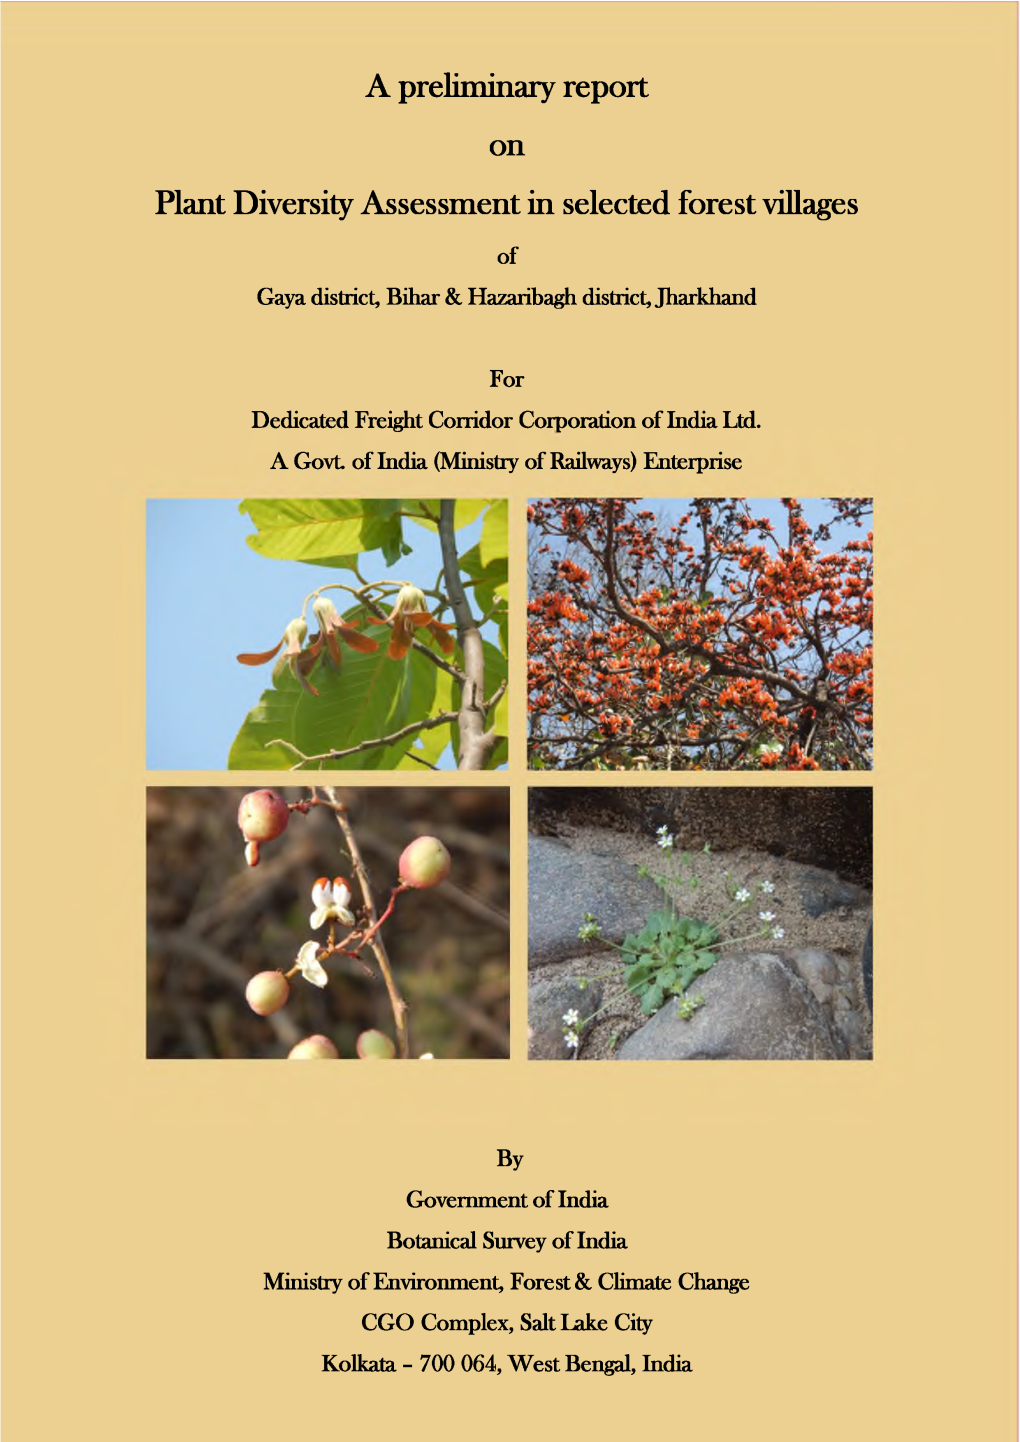 A Preliminary Report on Plant Diversity Assessment in Selected Forest Villages